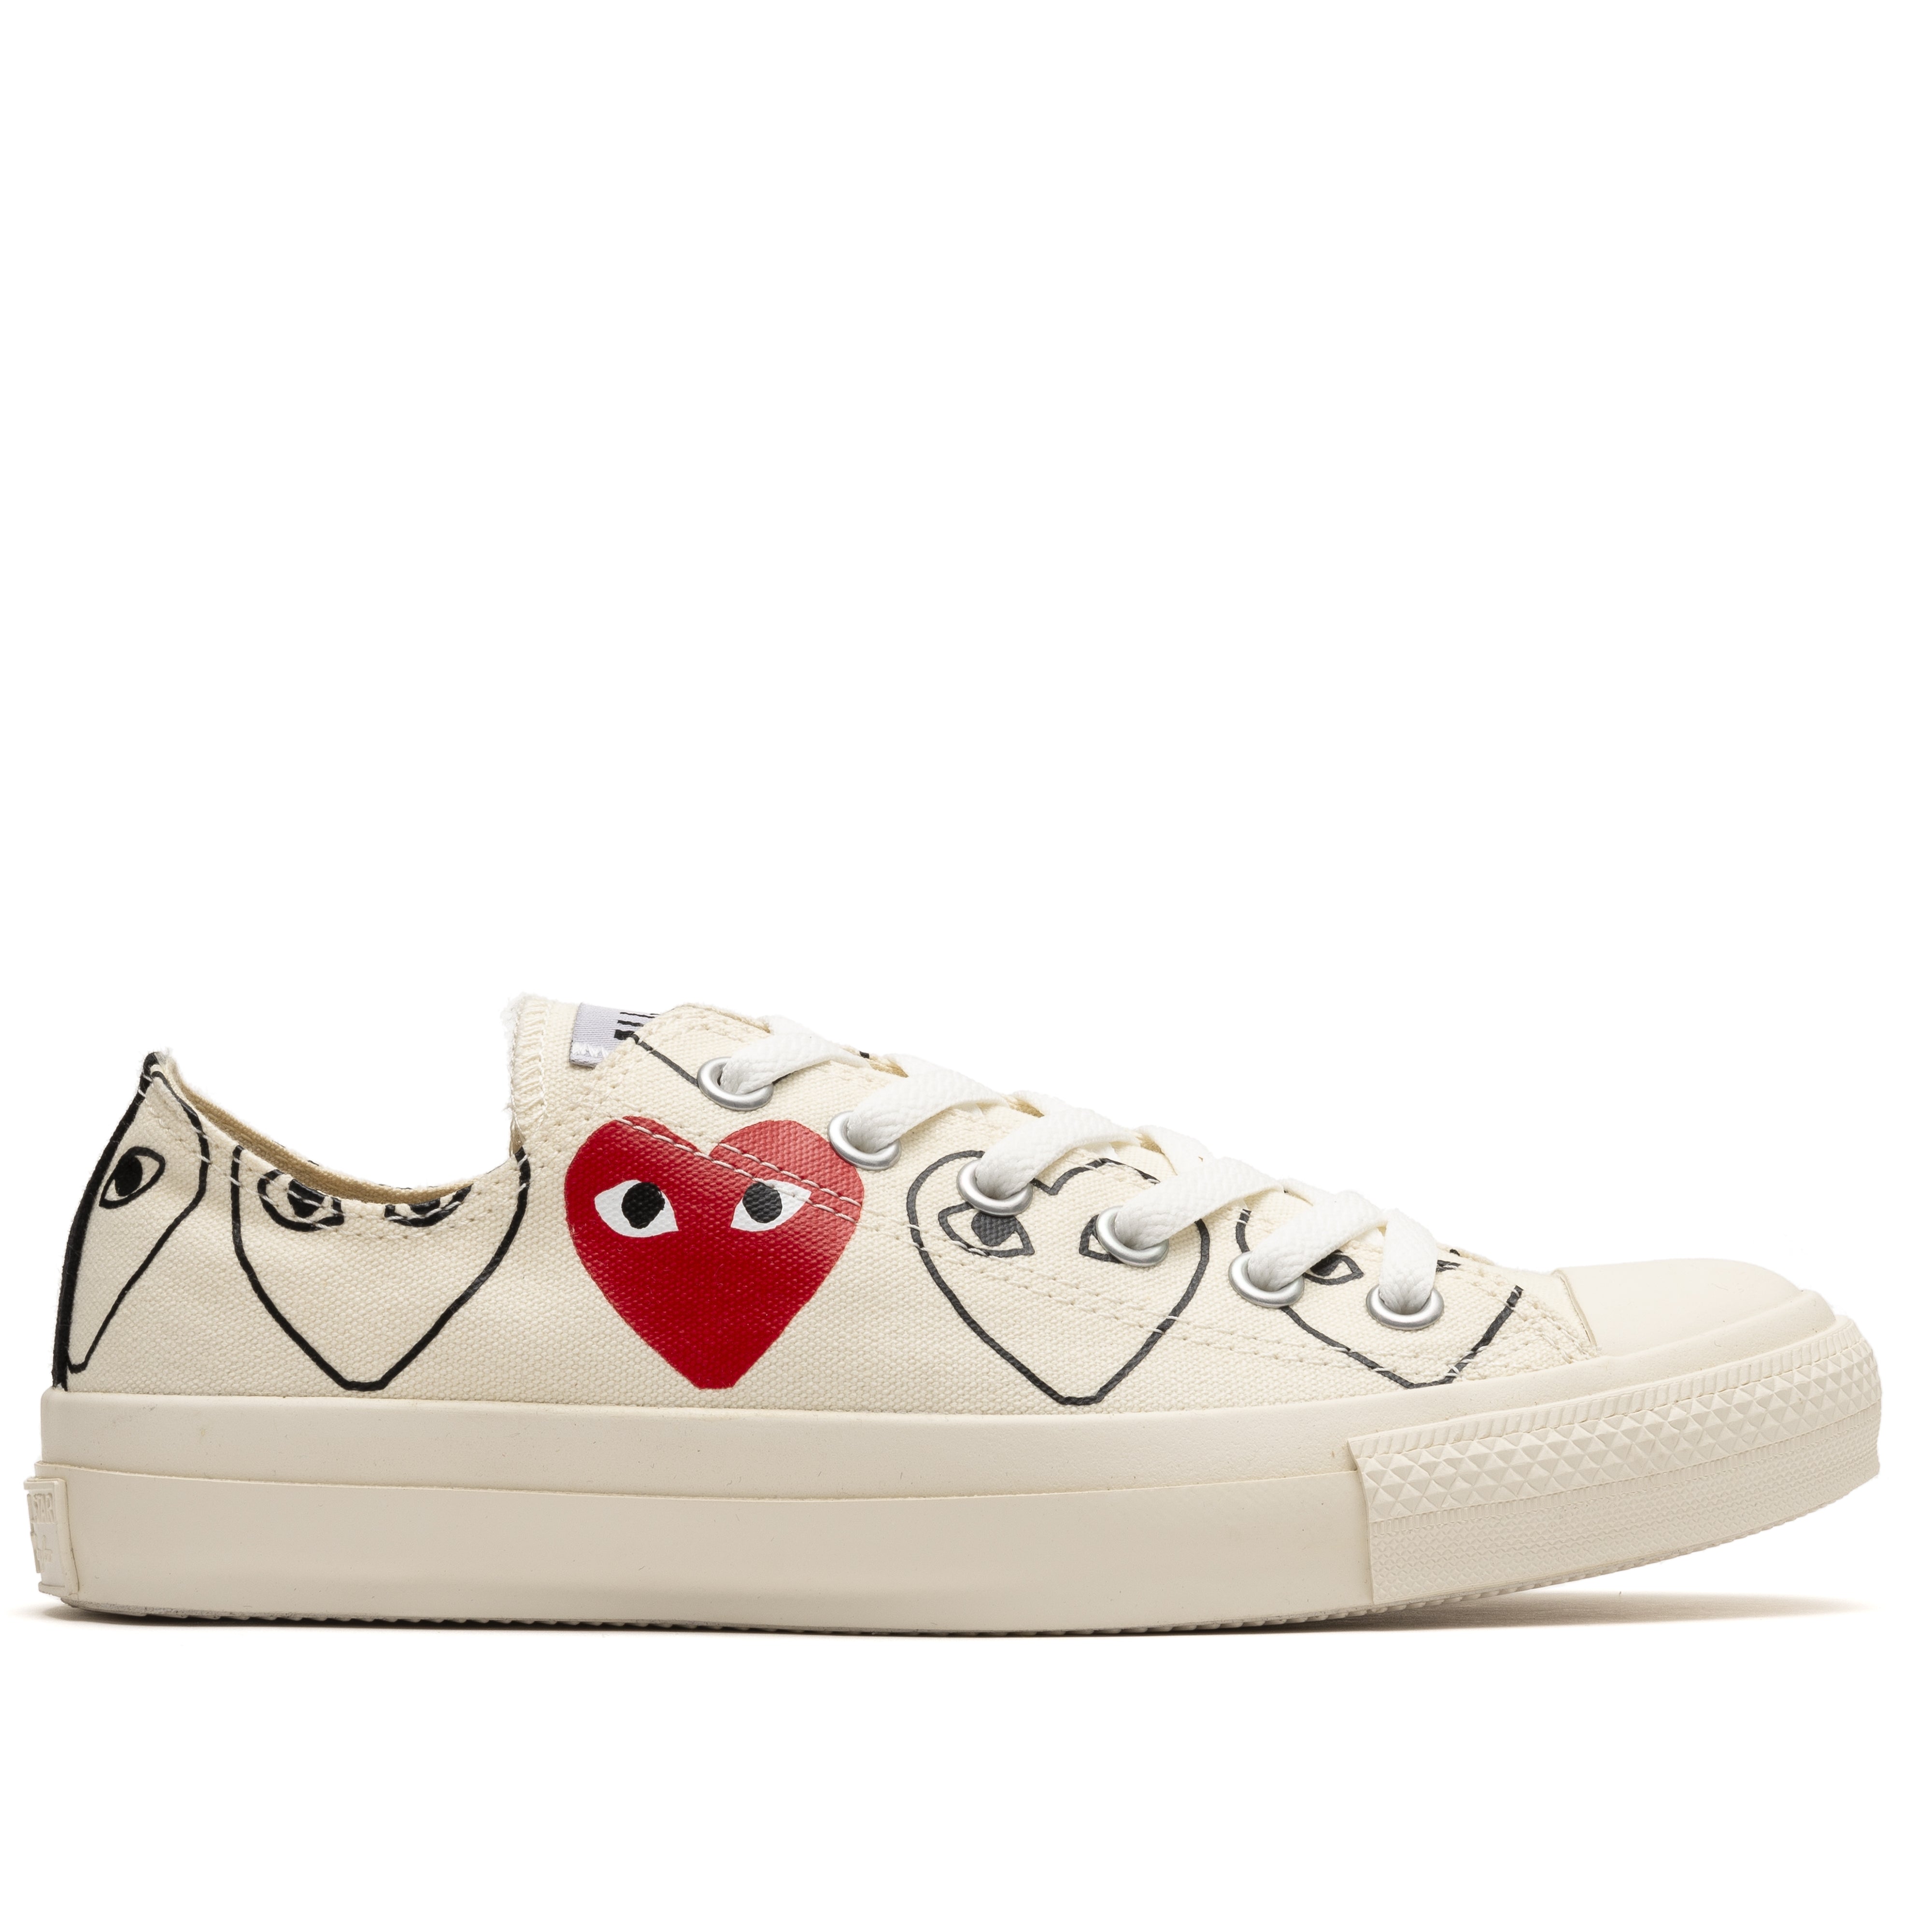 PLAY CDG CONVERSE - Chuck Taylor Low - (White) – DSMG E 